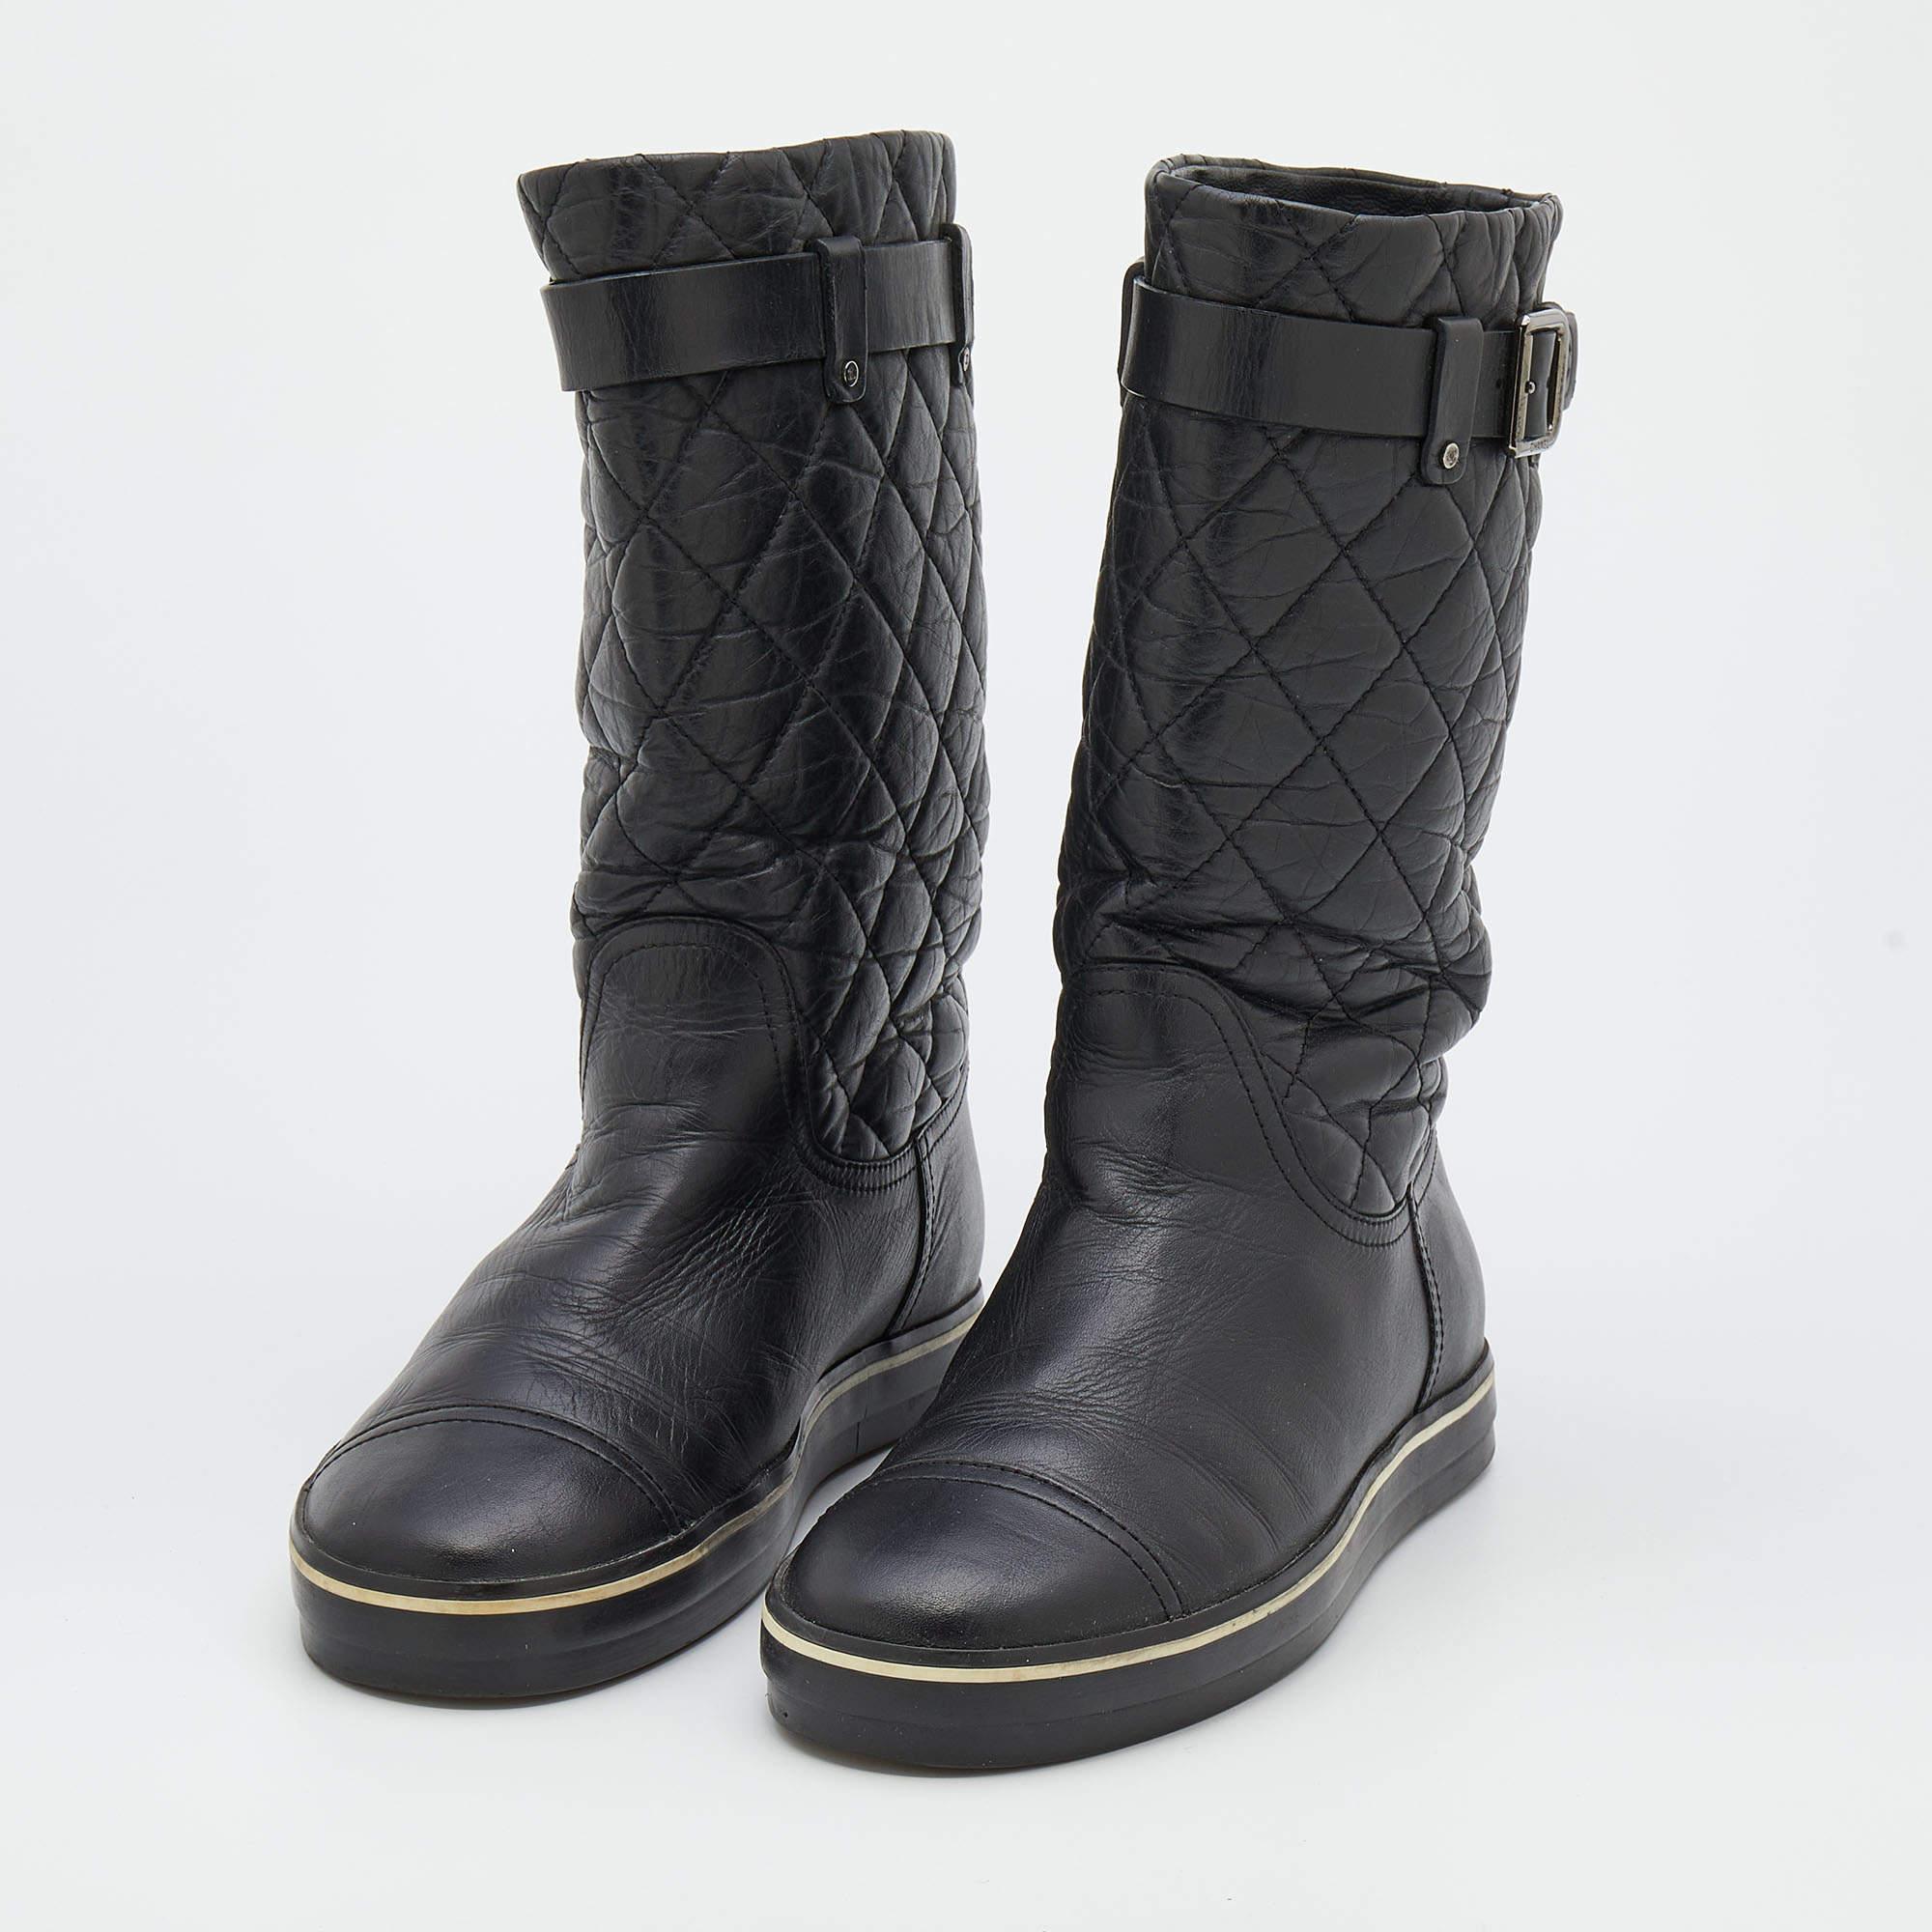 Chanel Black Quilted Leather Mid Calf Length Boots Size 37.5 1